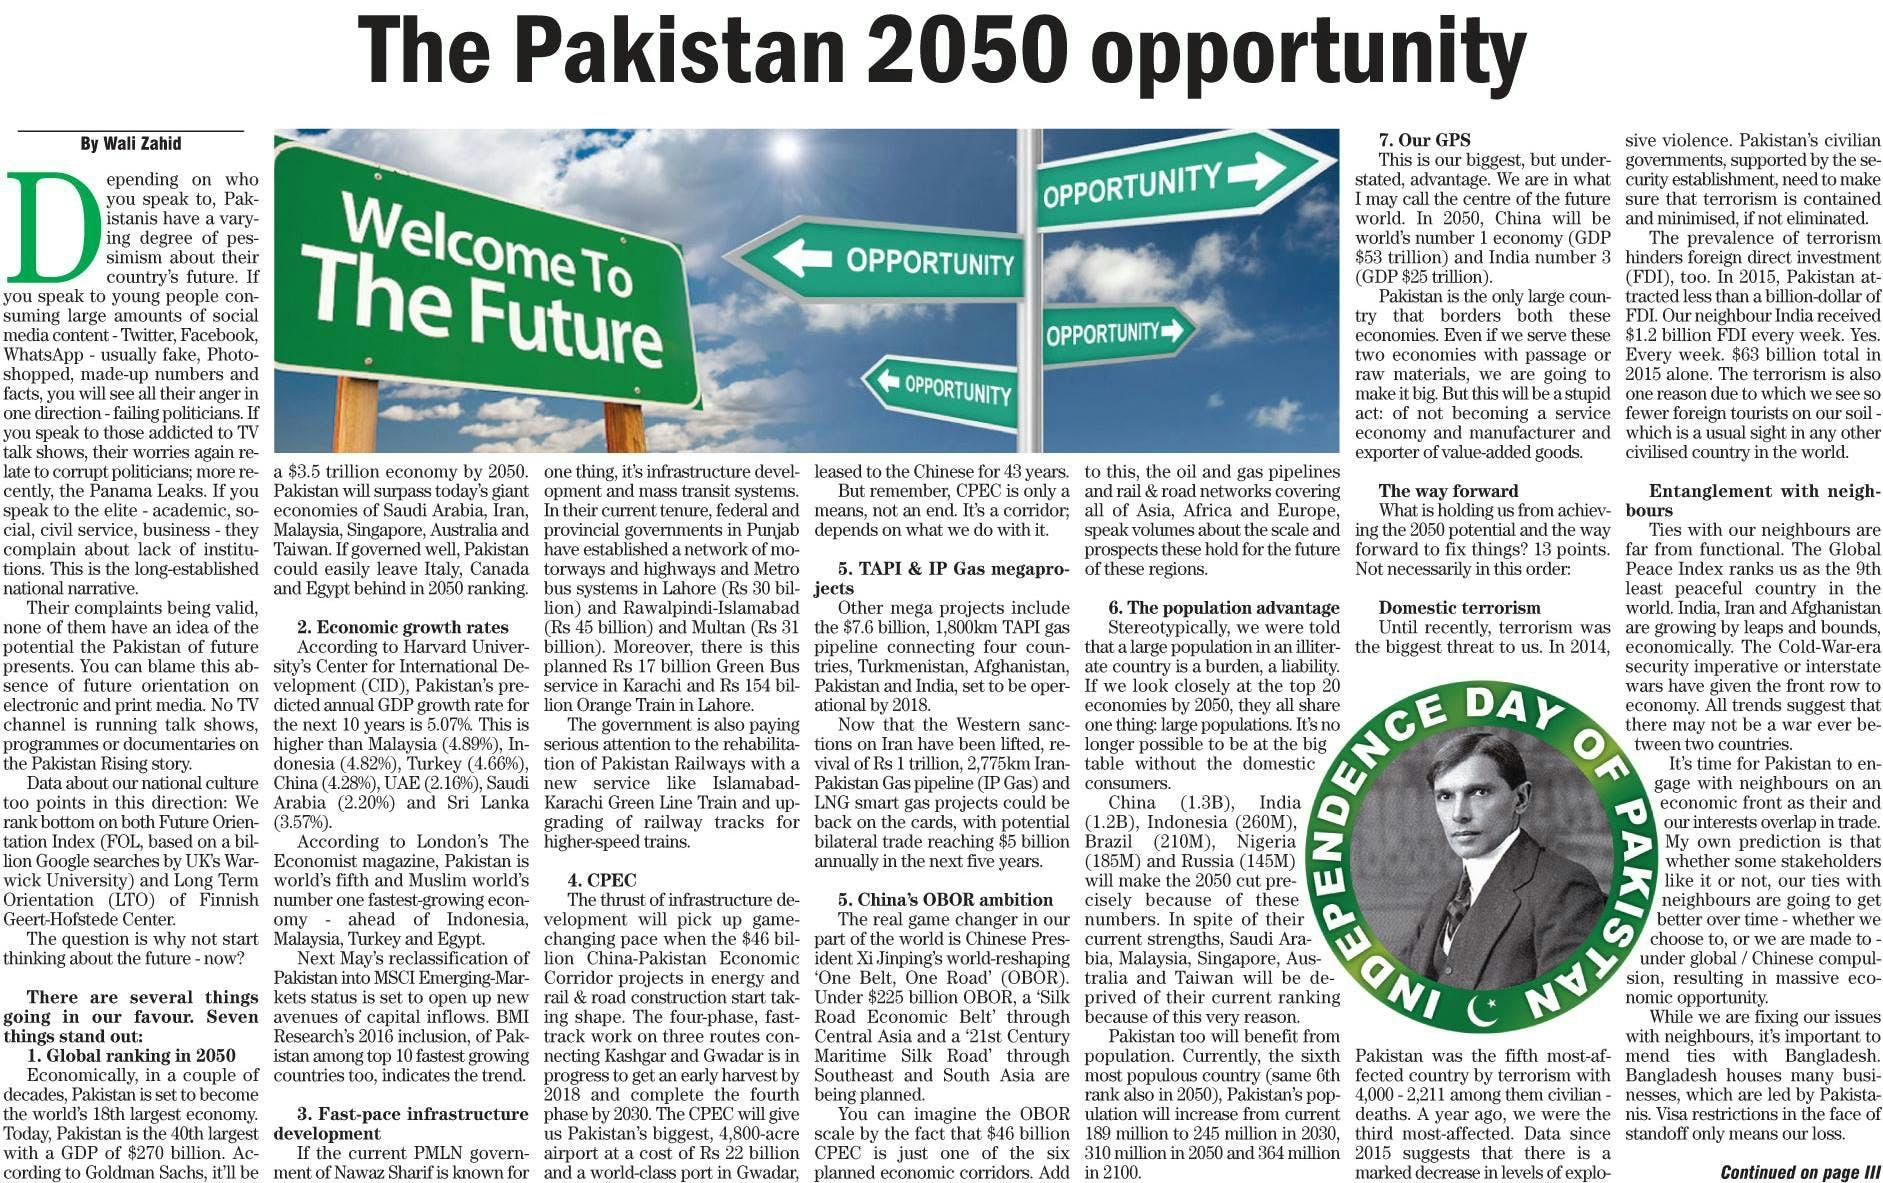 All the numbers and facts you need to believe in the Pakistan of 2050